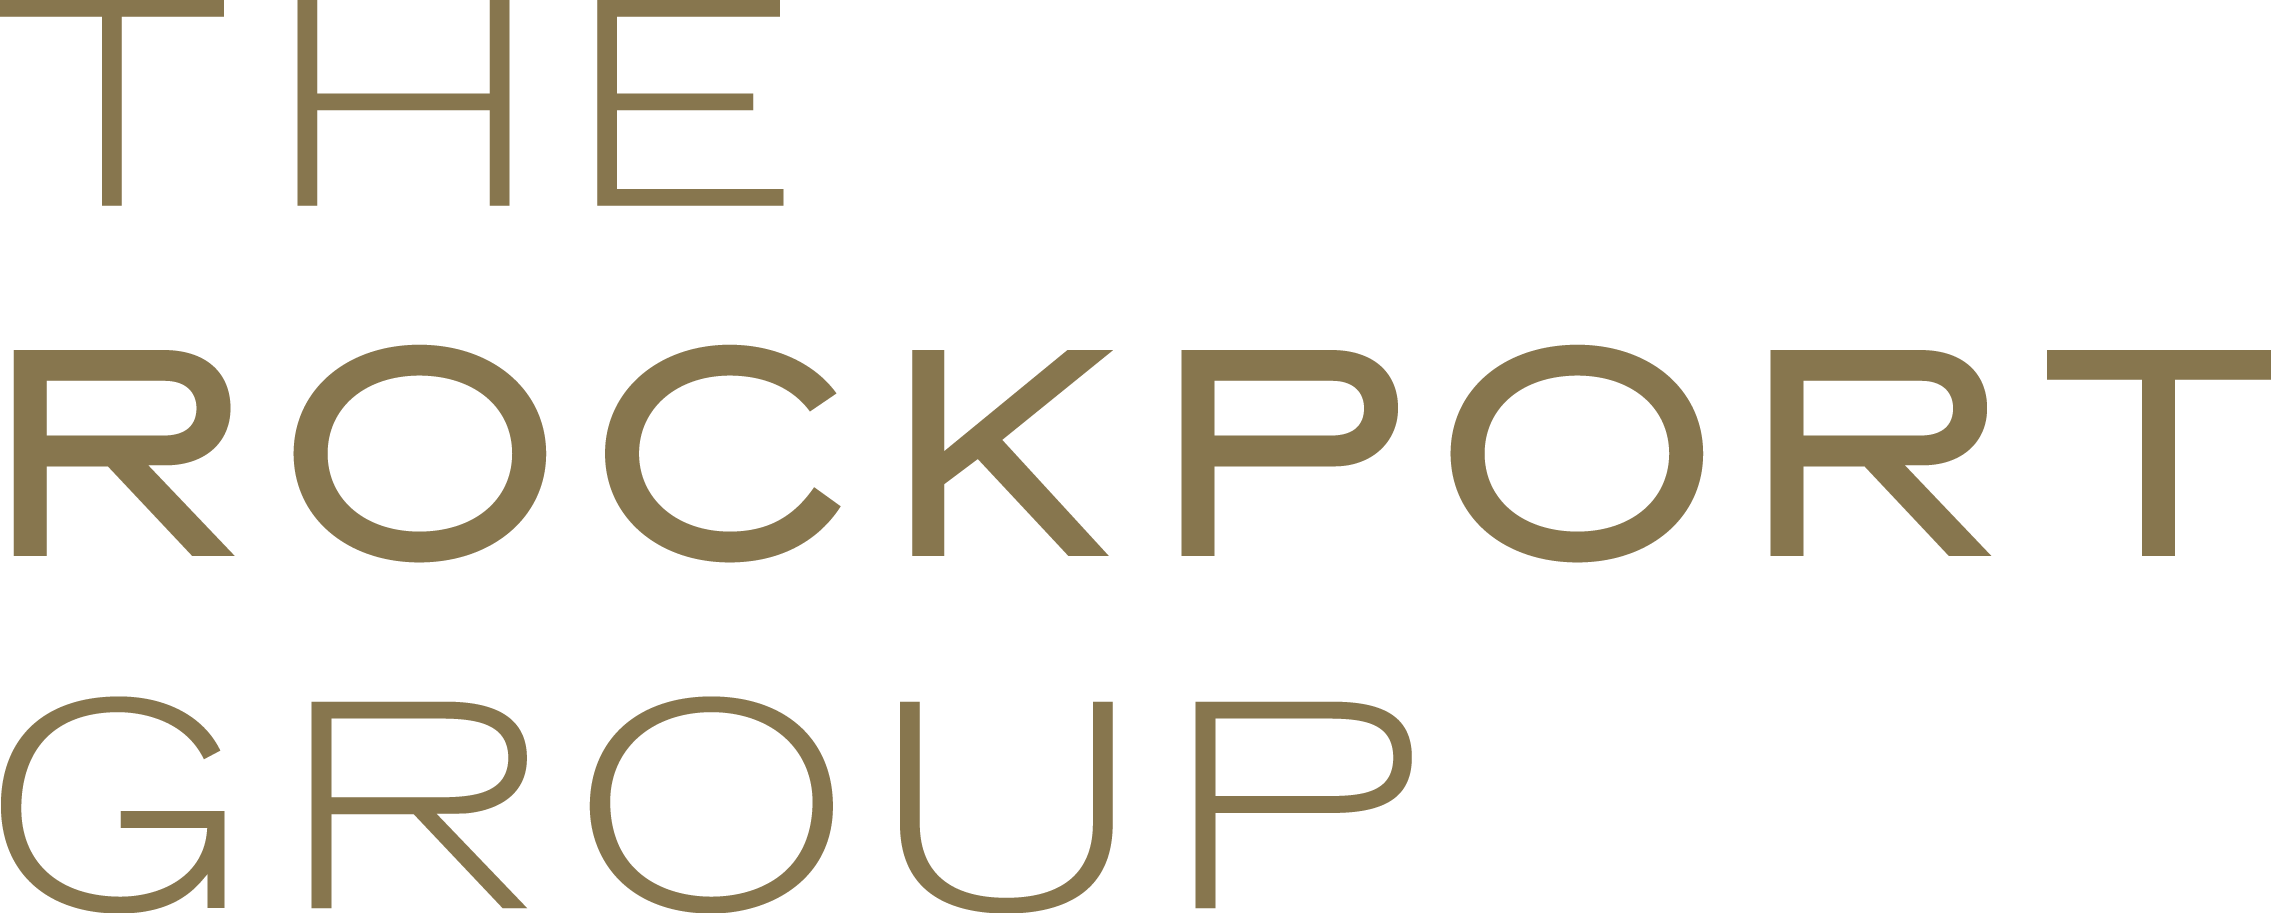 The Rockport Company Looks to Sell Assets and Pursue